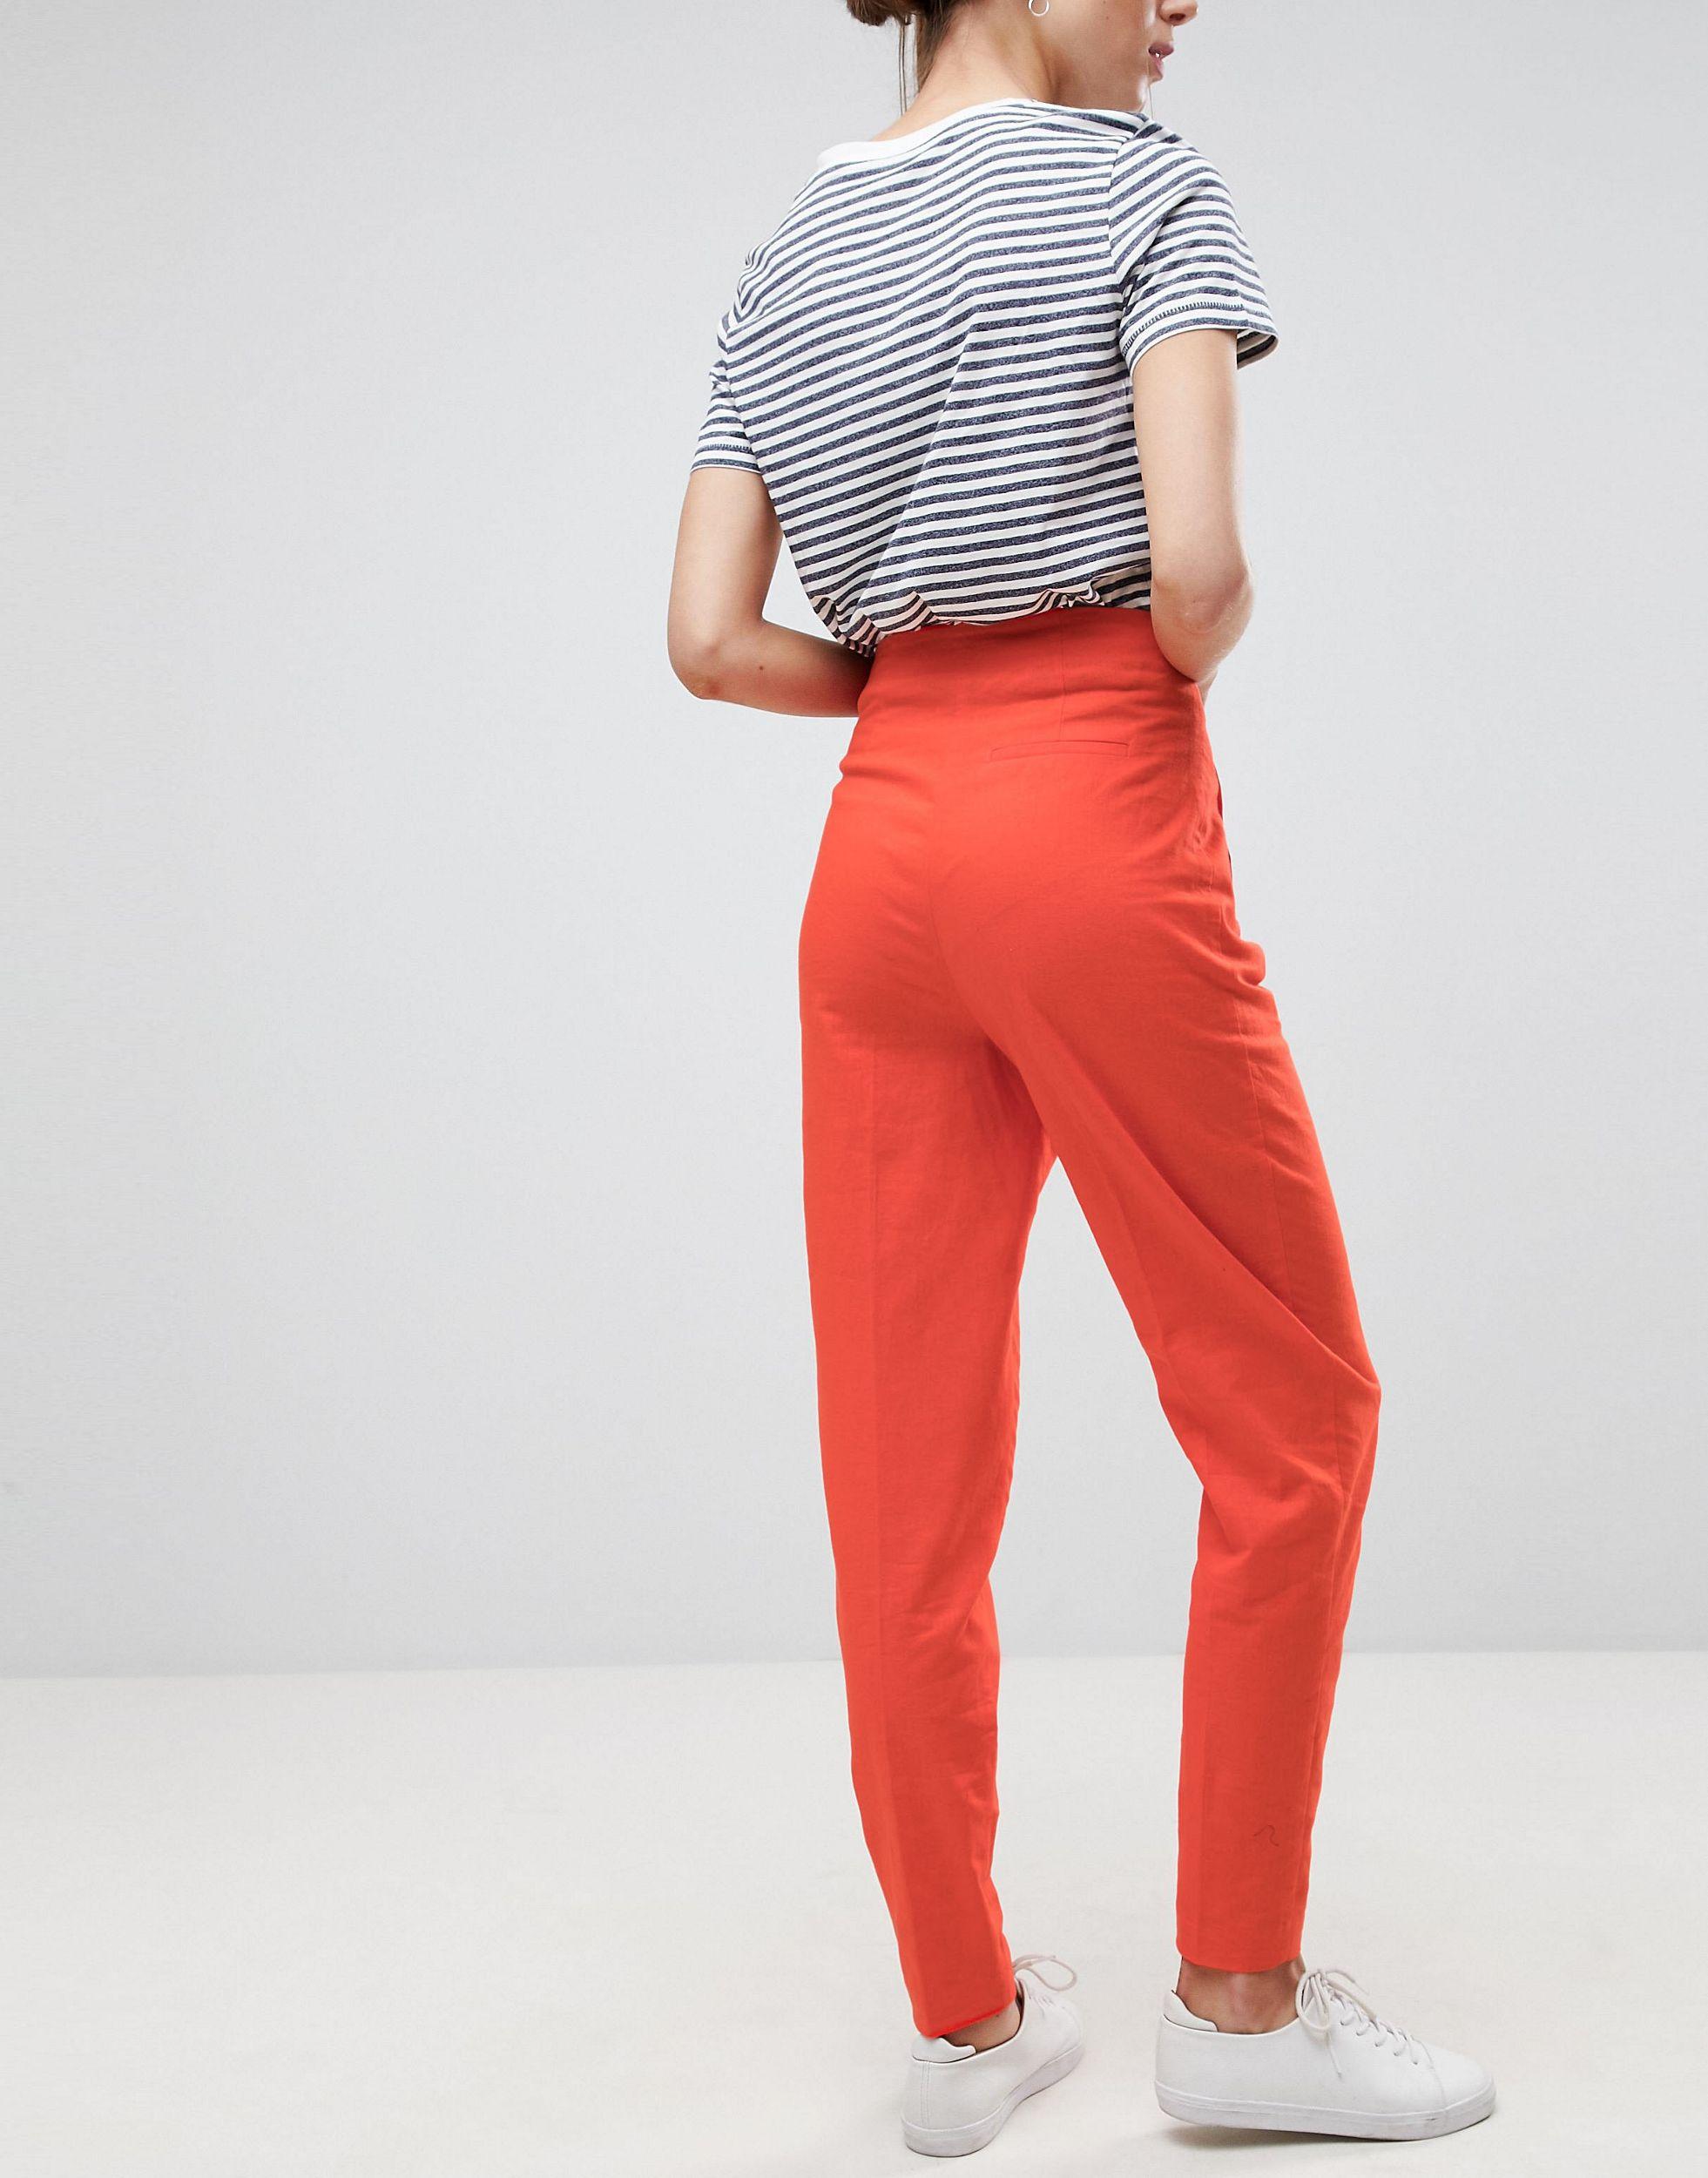 ASOS Tailored Clean High Waist Linen Peg Trousers in Orange - Lyst